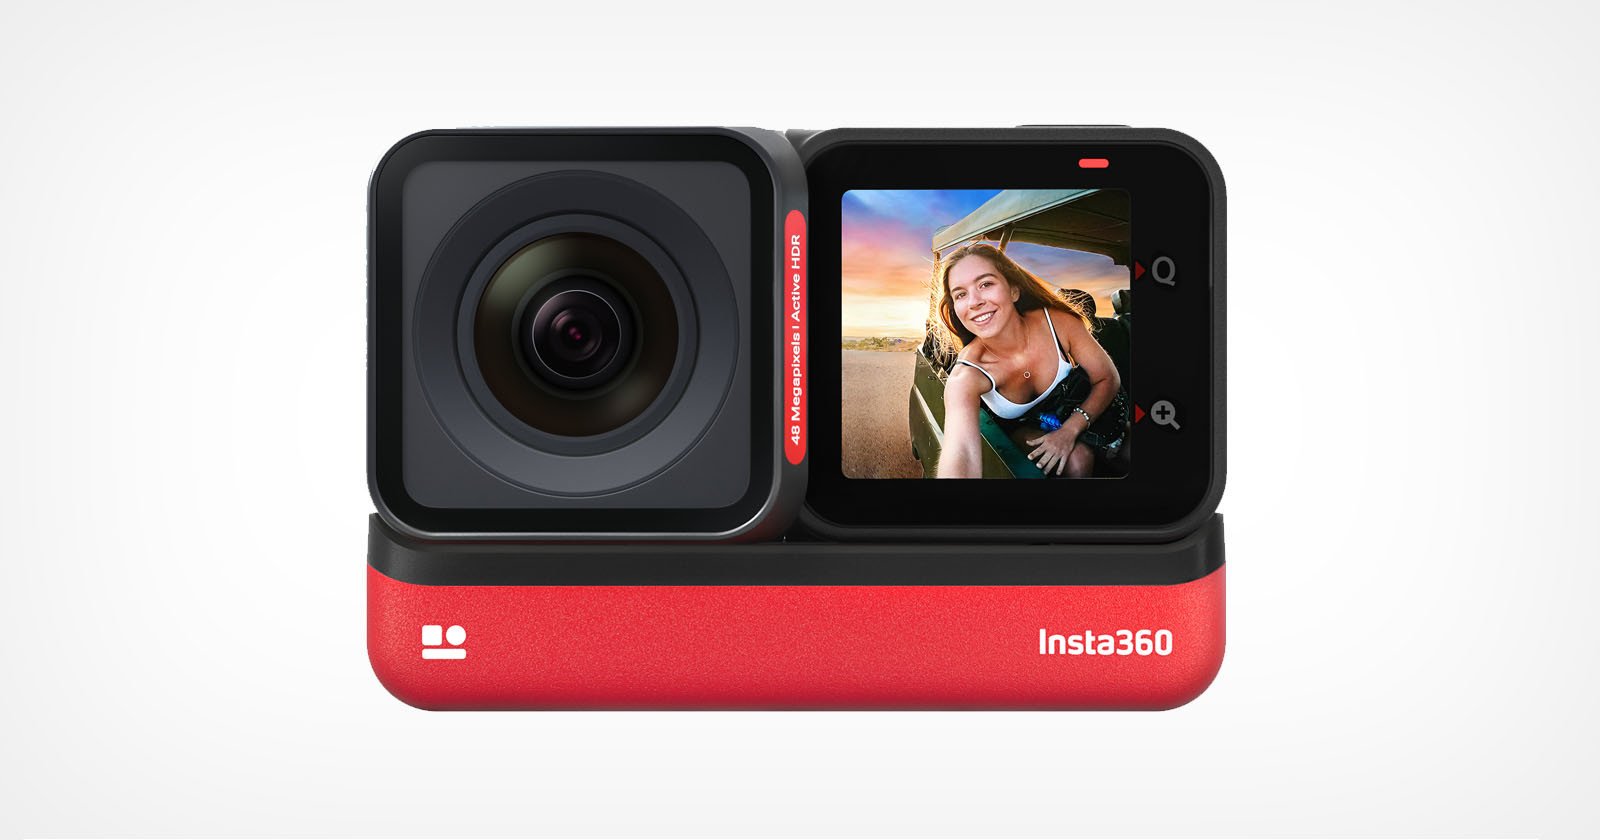  insta360 one 48mp interchangeable lens action camera 